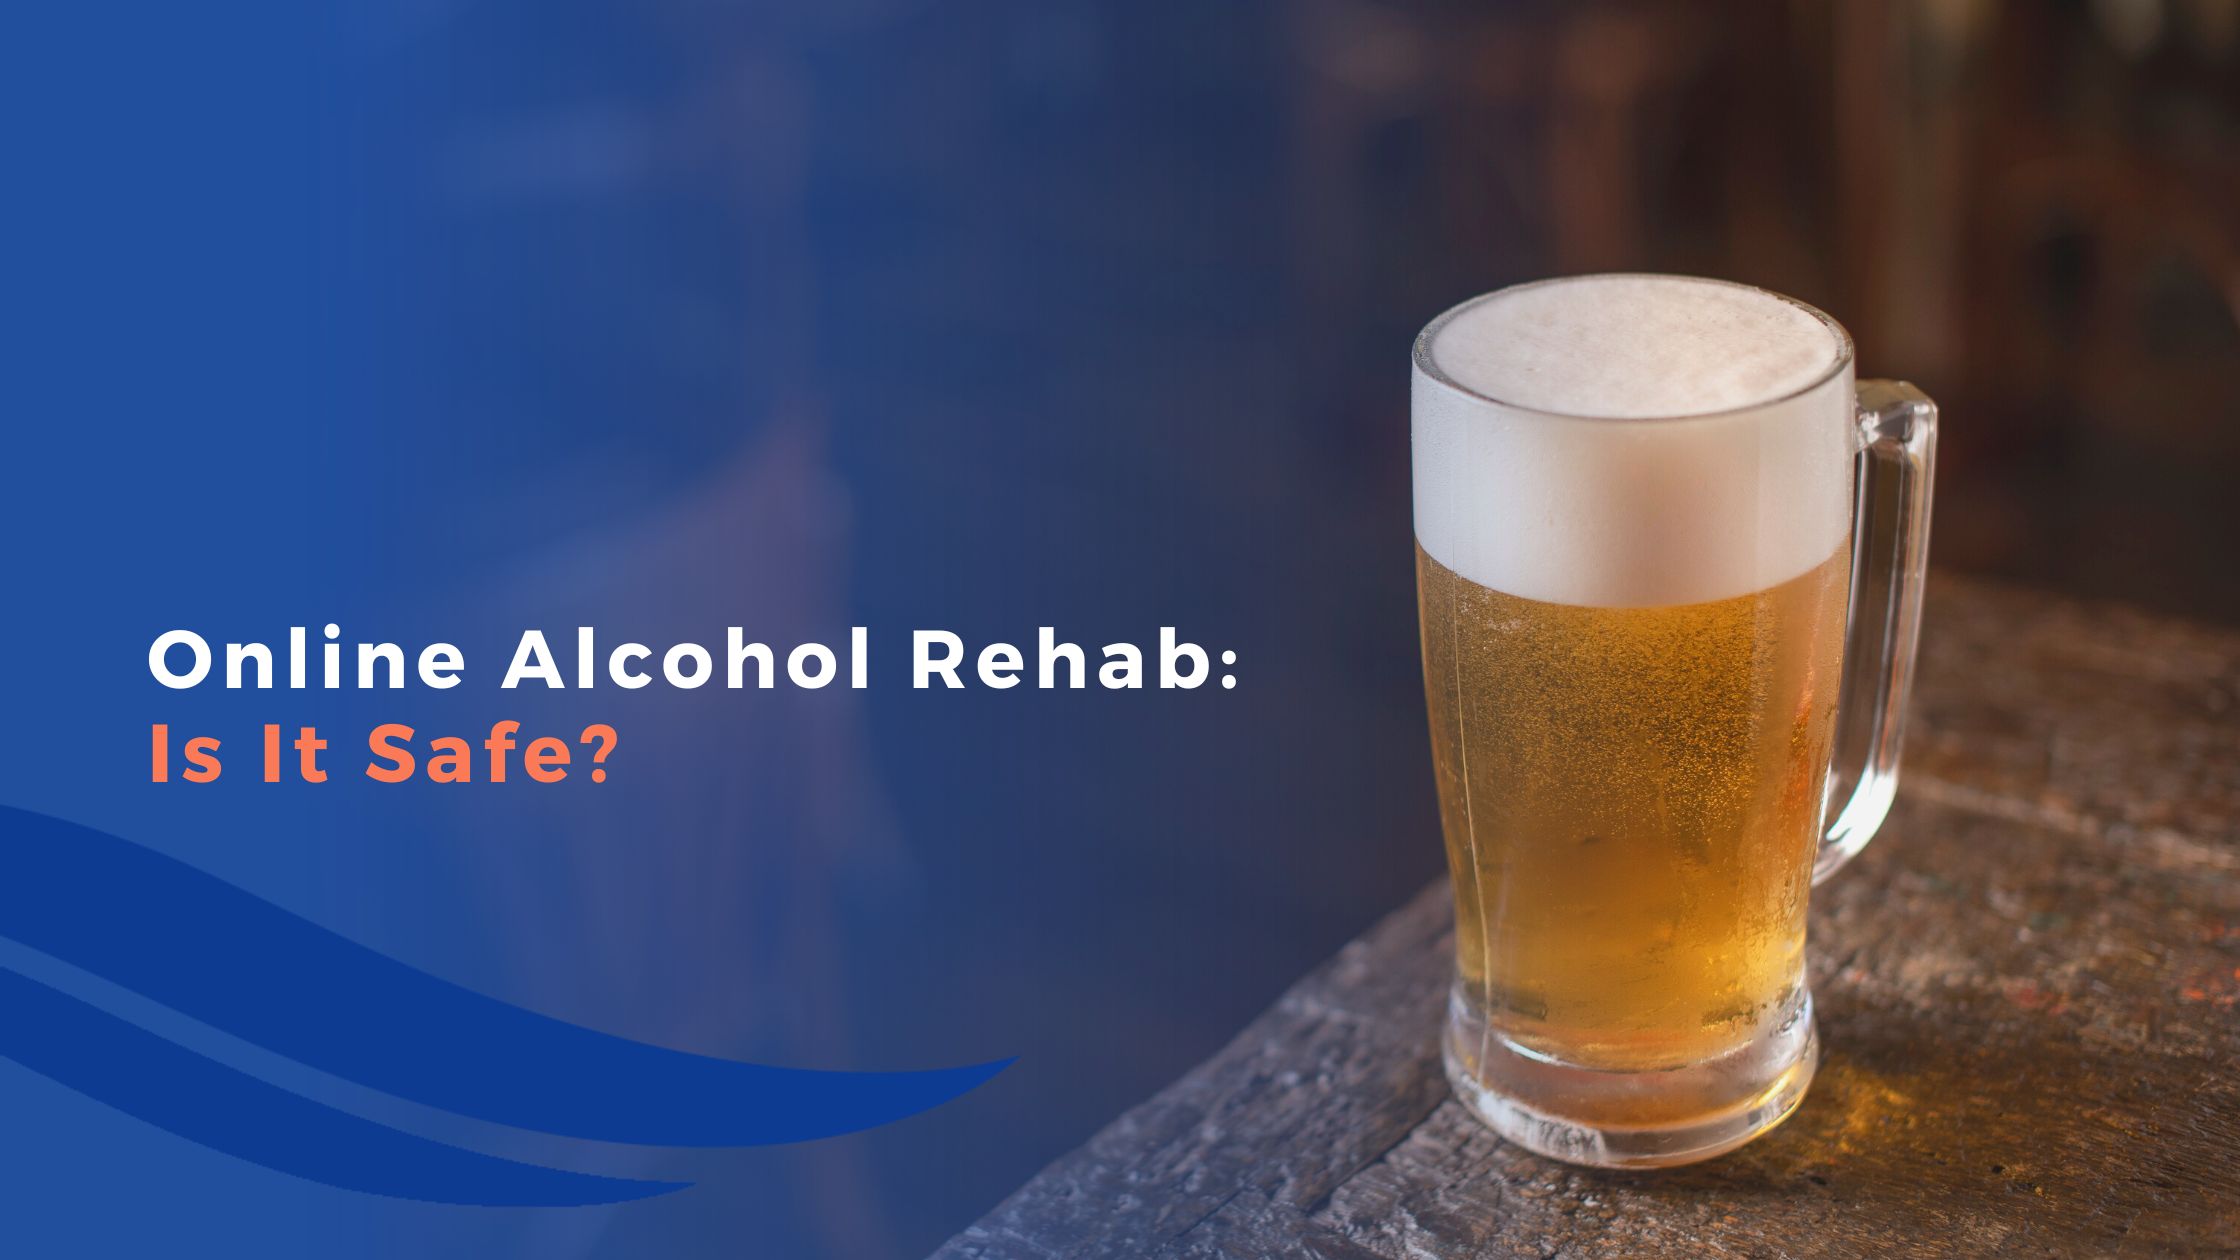 Online Alcohol Rehab: Is It Safe?